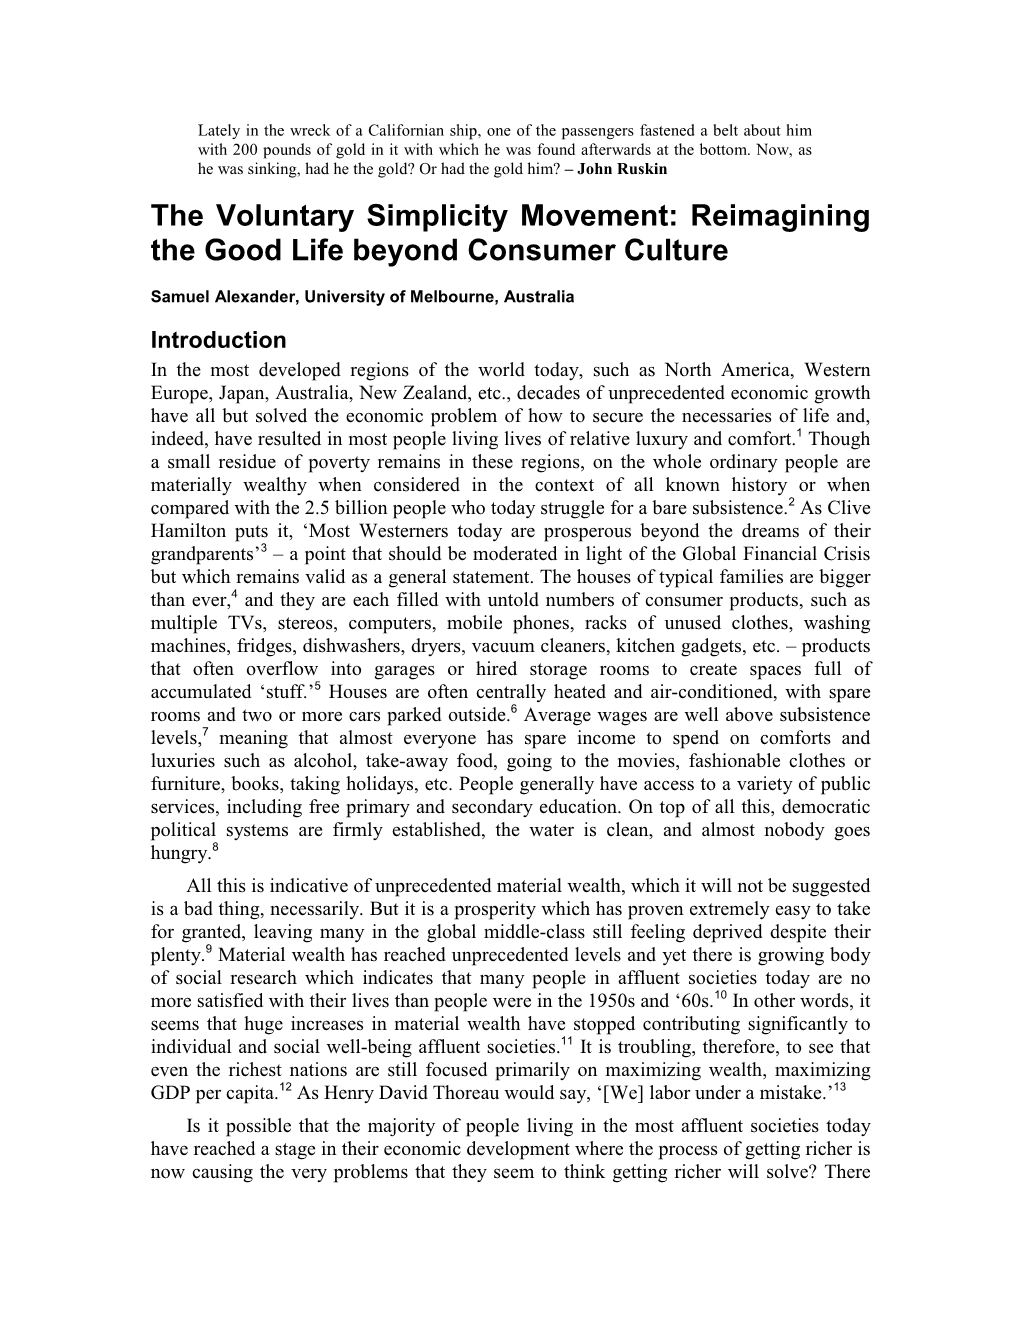 The Voluntary Simplicity Movement: Reimagining the Good Life Beyond Consumer Culture